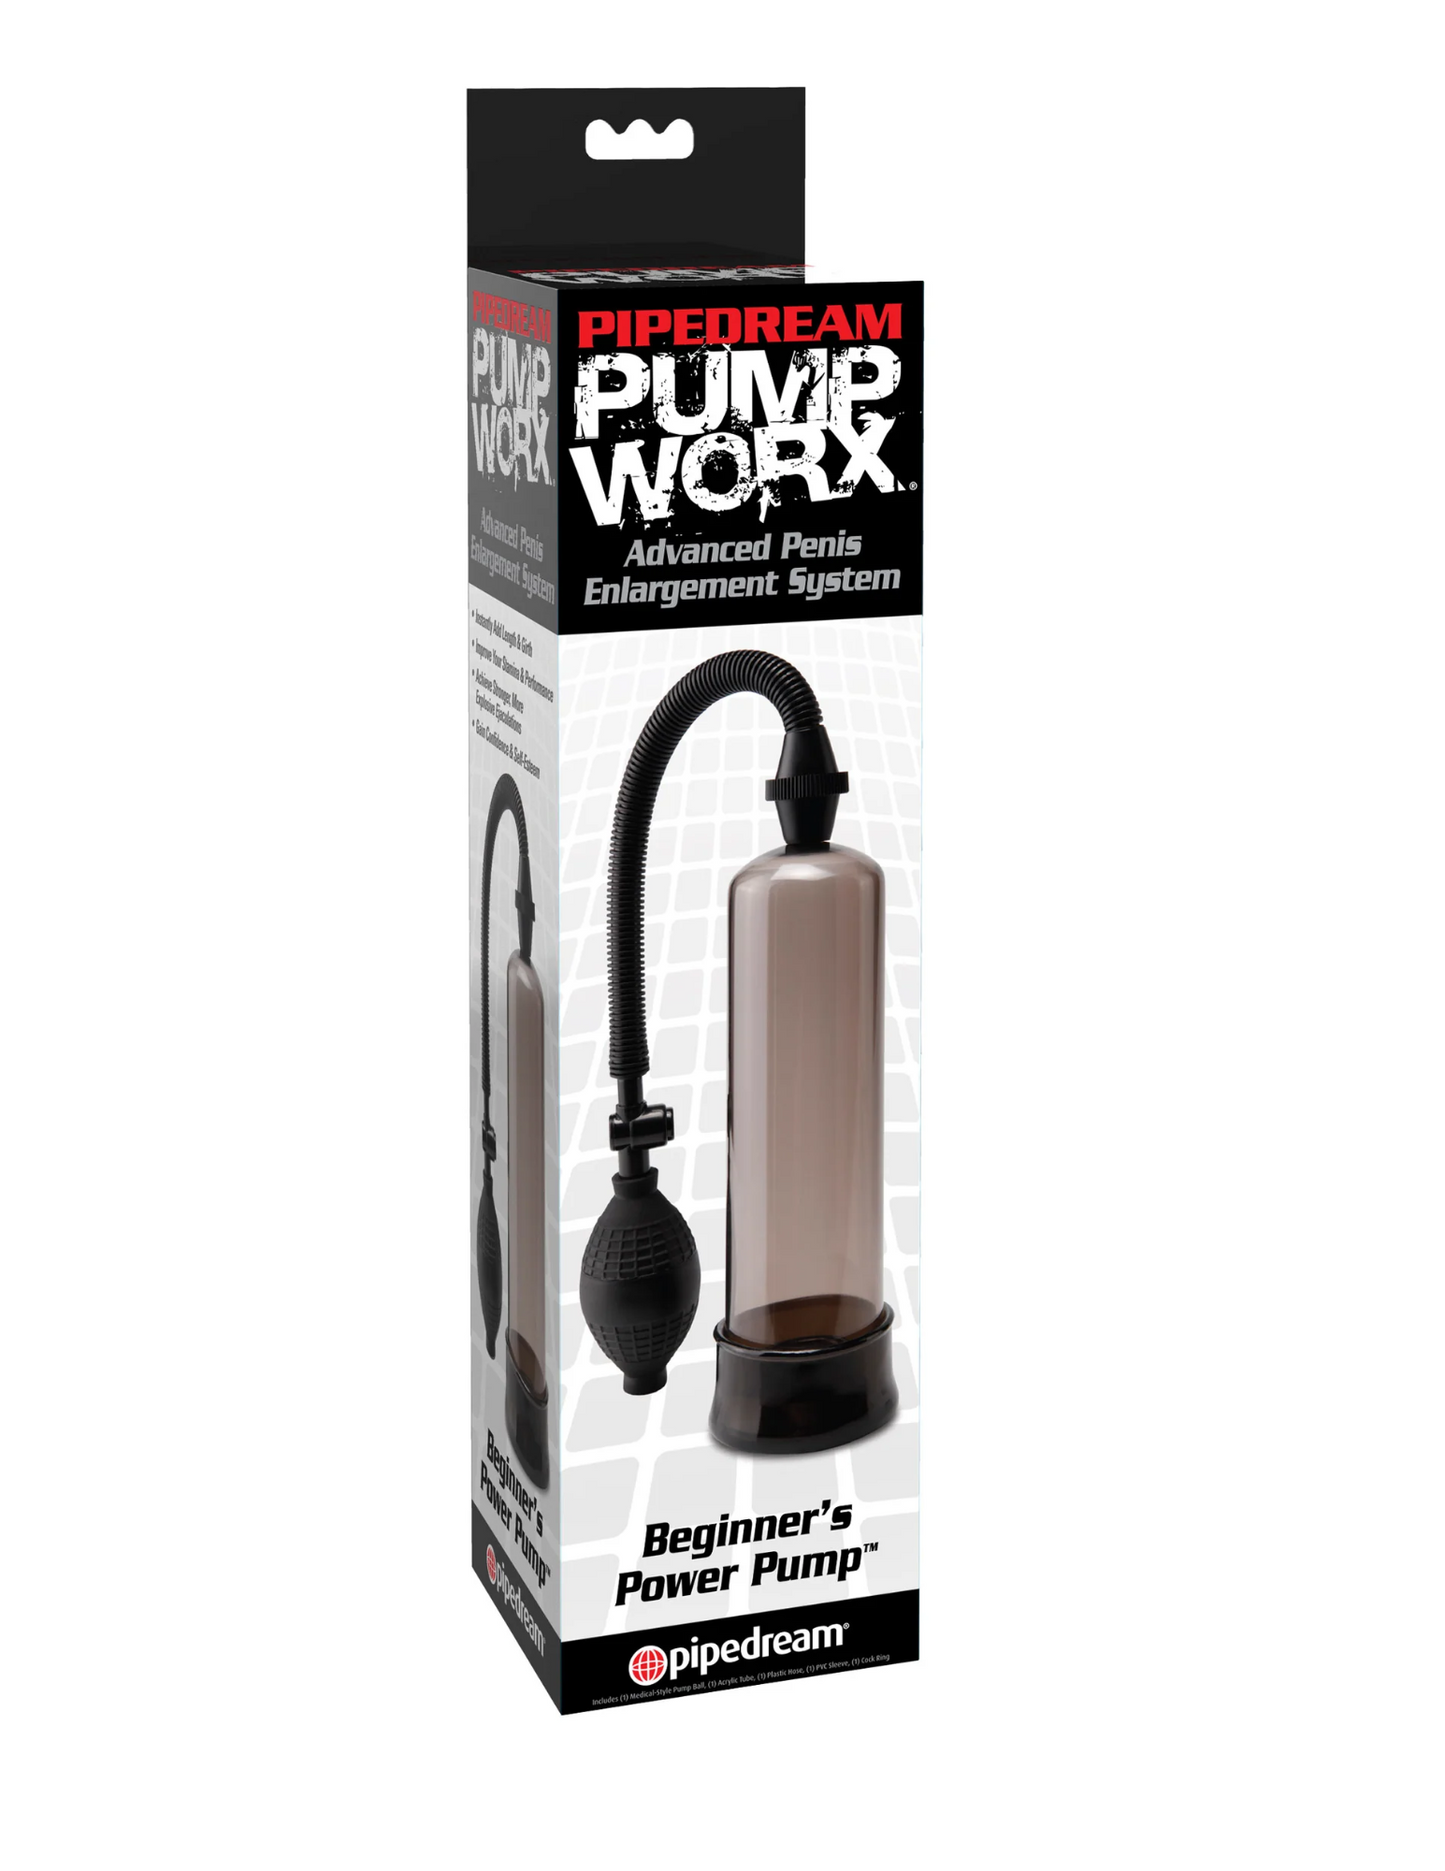 Photo of the box for the Pump Worx Beginner's Penis Enlargement System from Pipedreams (smoke).